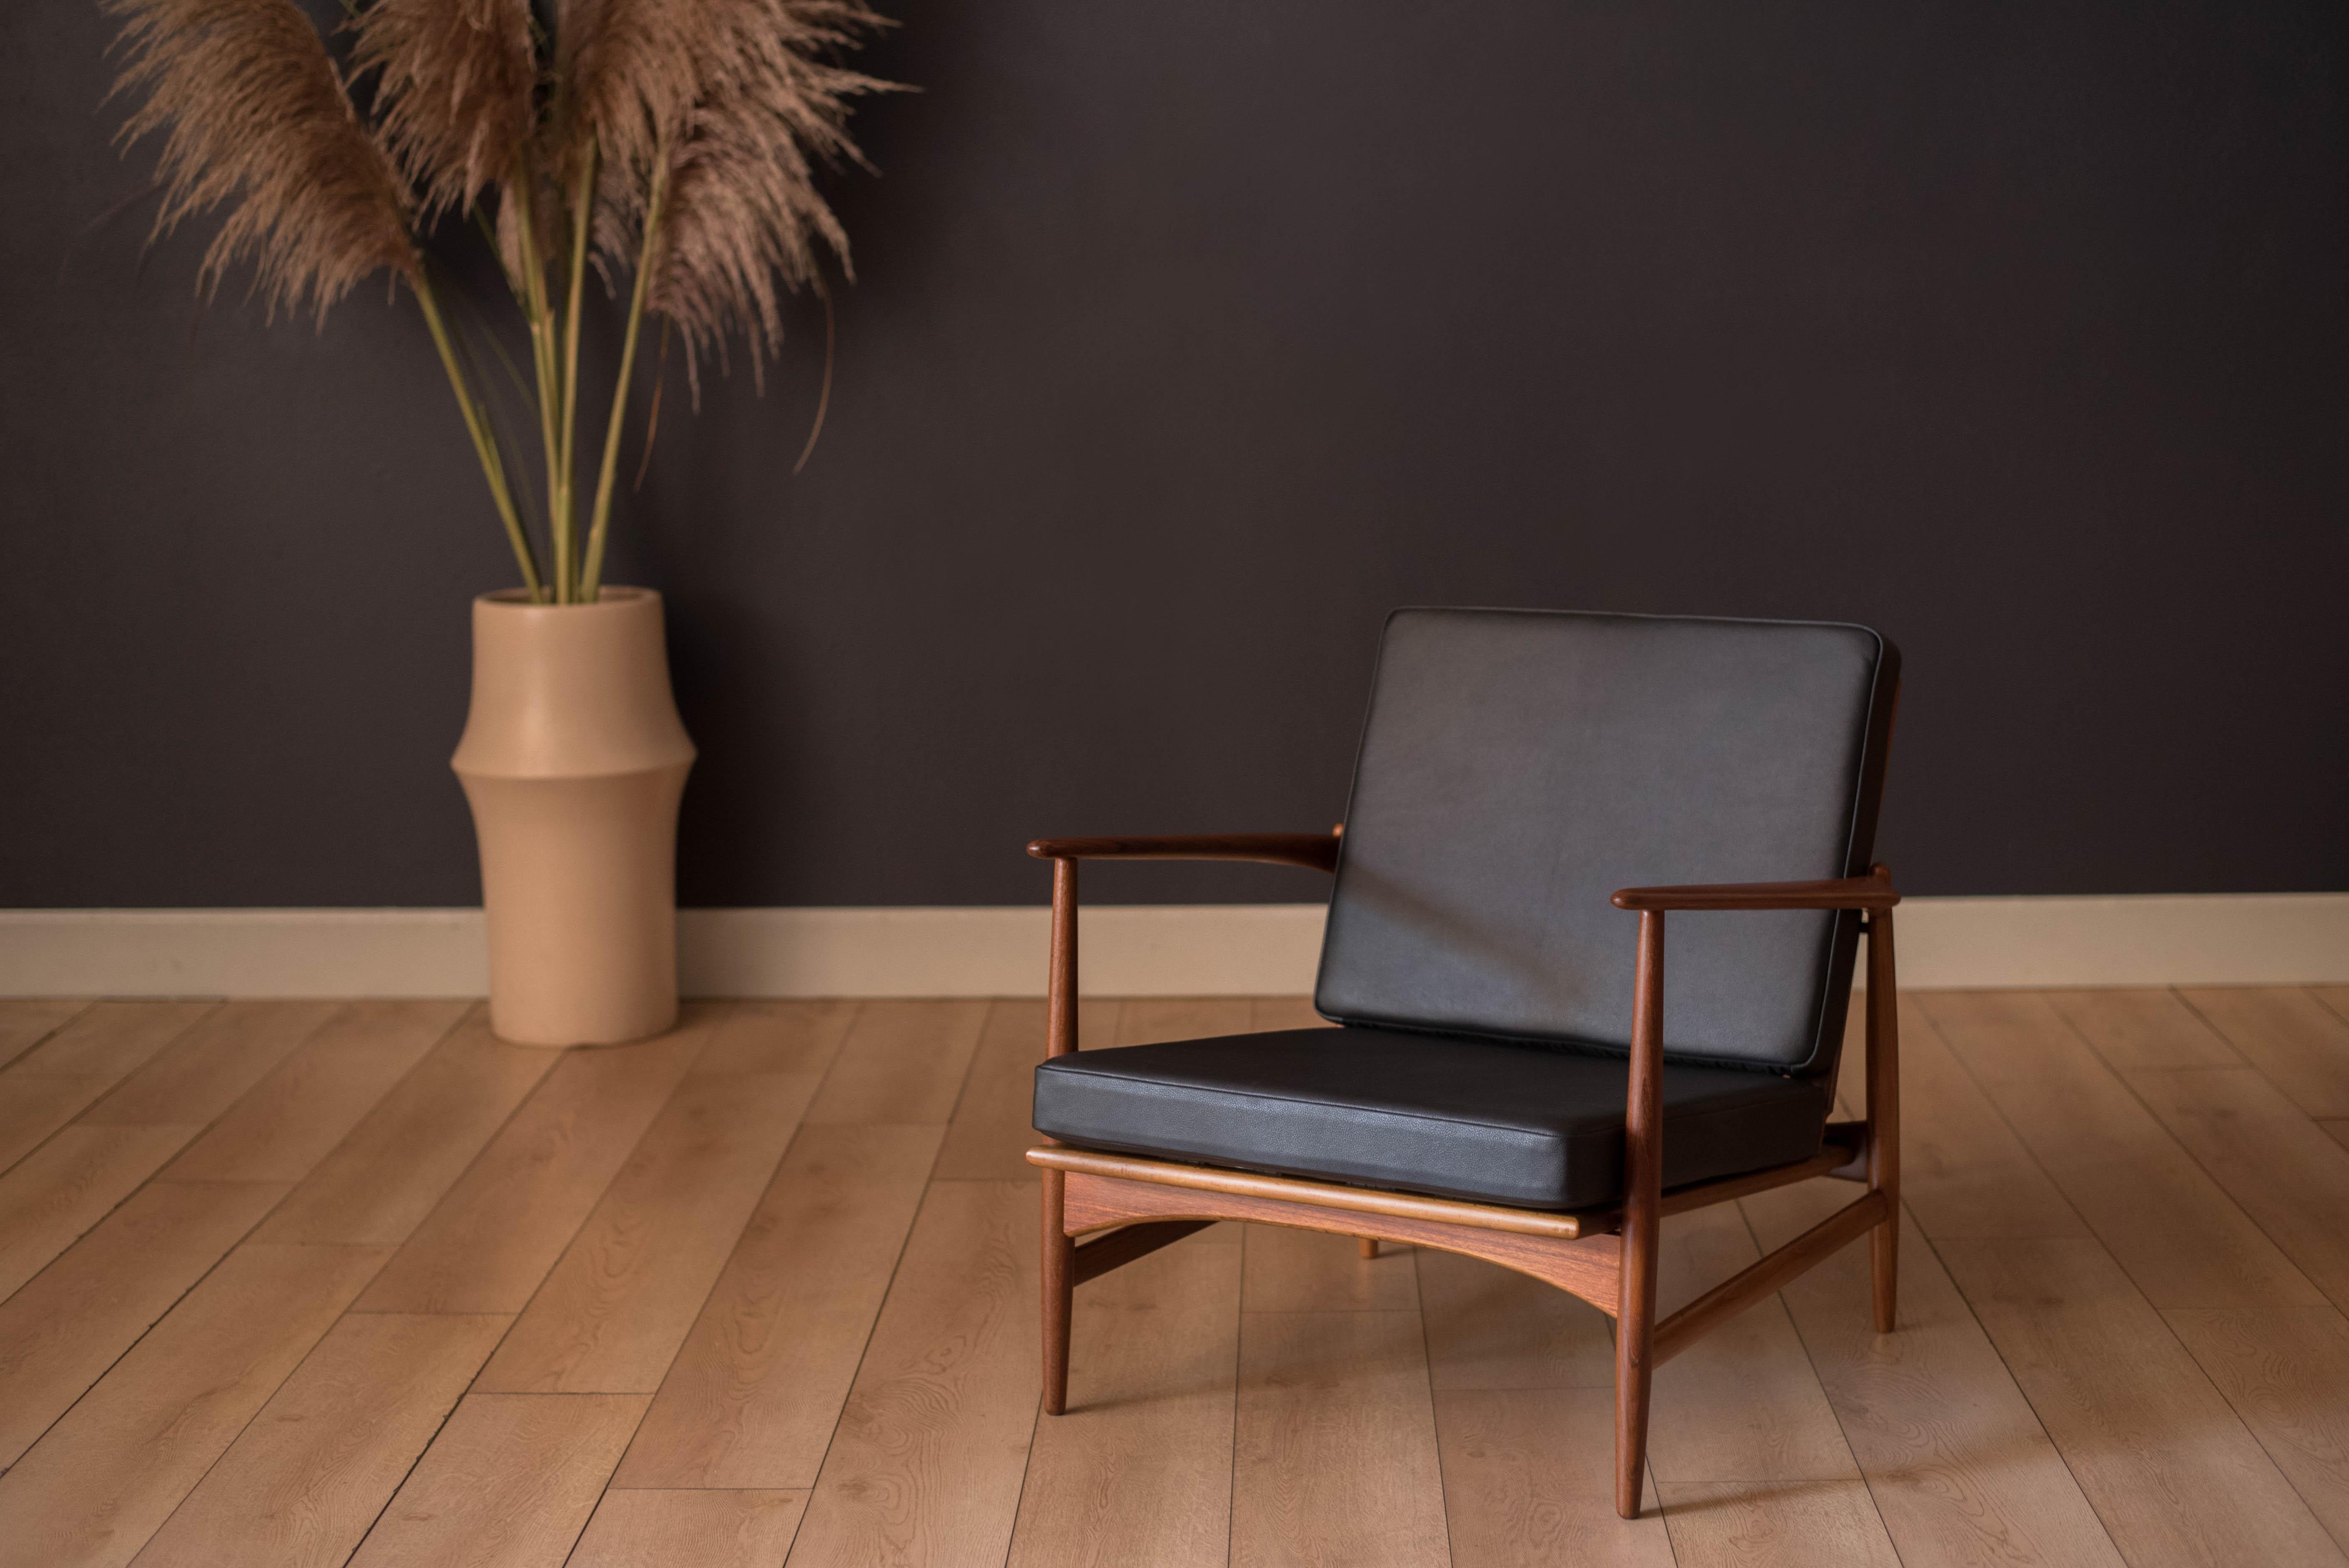 Mid-Century Modern lounge armchair in teak designed by Ib Kofod-Larsen for Selig, Denmark, circa 1960's. This vintage piece has been reupholstered in black leather with brand new foam and webbing. Features a sculptural teak frame with brass accents